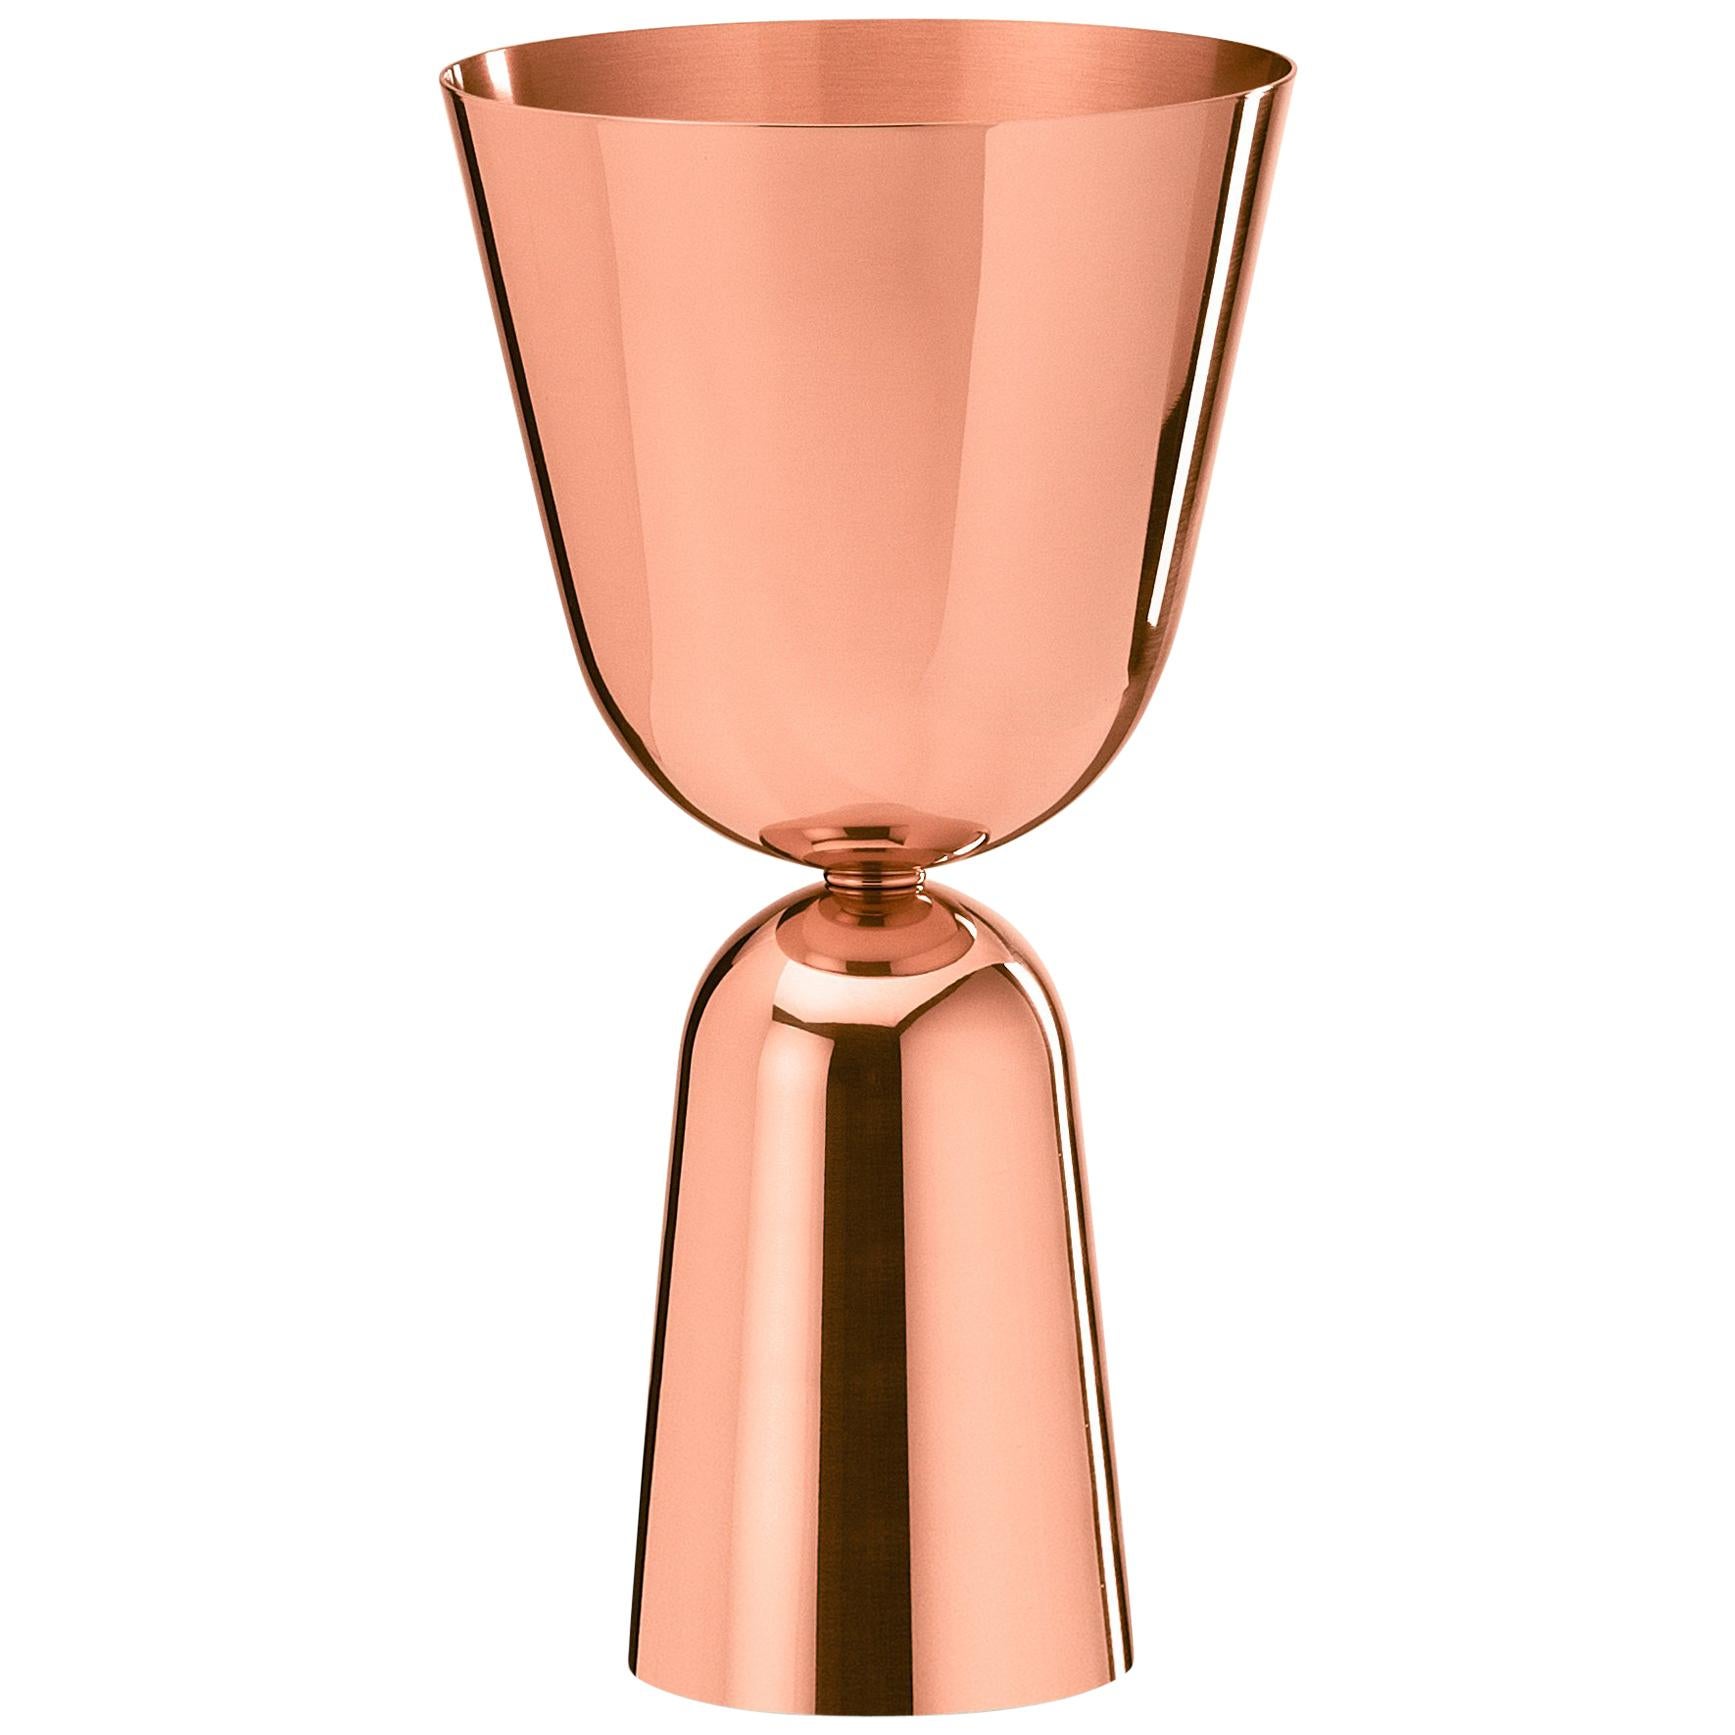 Ghidini 1961 Tall Flirt Collection Vase in Copper by Noè Duchaufour-Lawrence For Sale